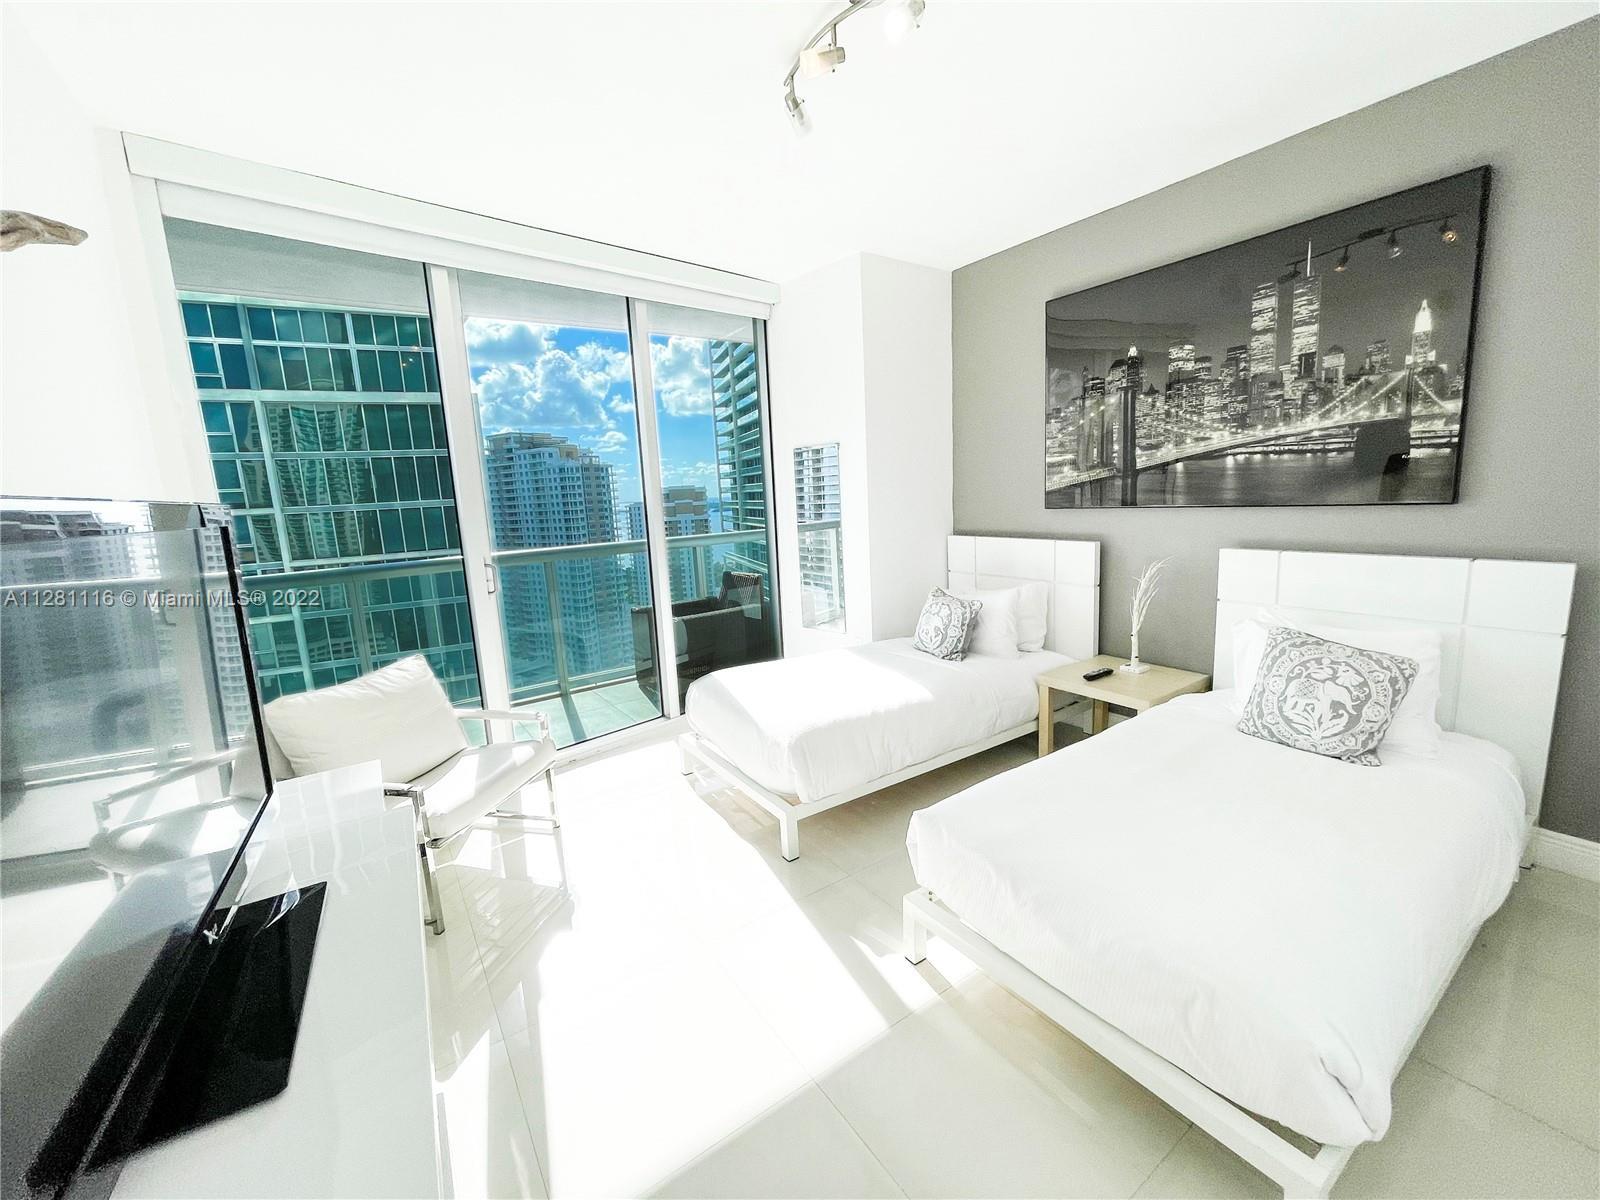 AMAZING 2/2 UNIT IN THE HEART OF BRICKELL. ;LUXURIOUS BUILDING. STAINLESS STEEL APPLIANCES. GRANITE 